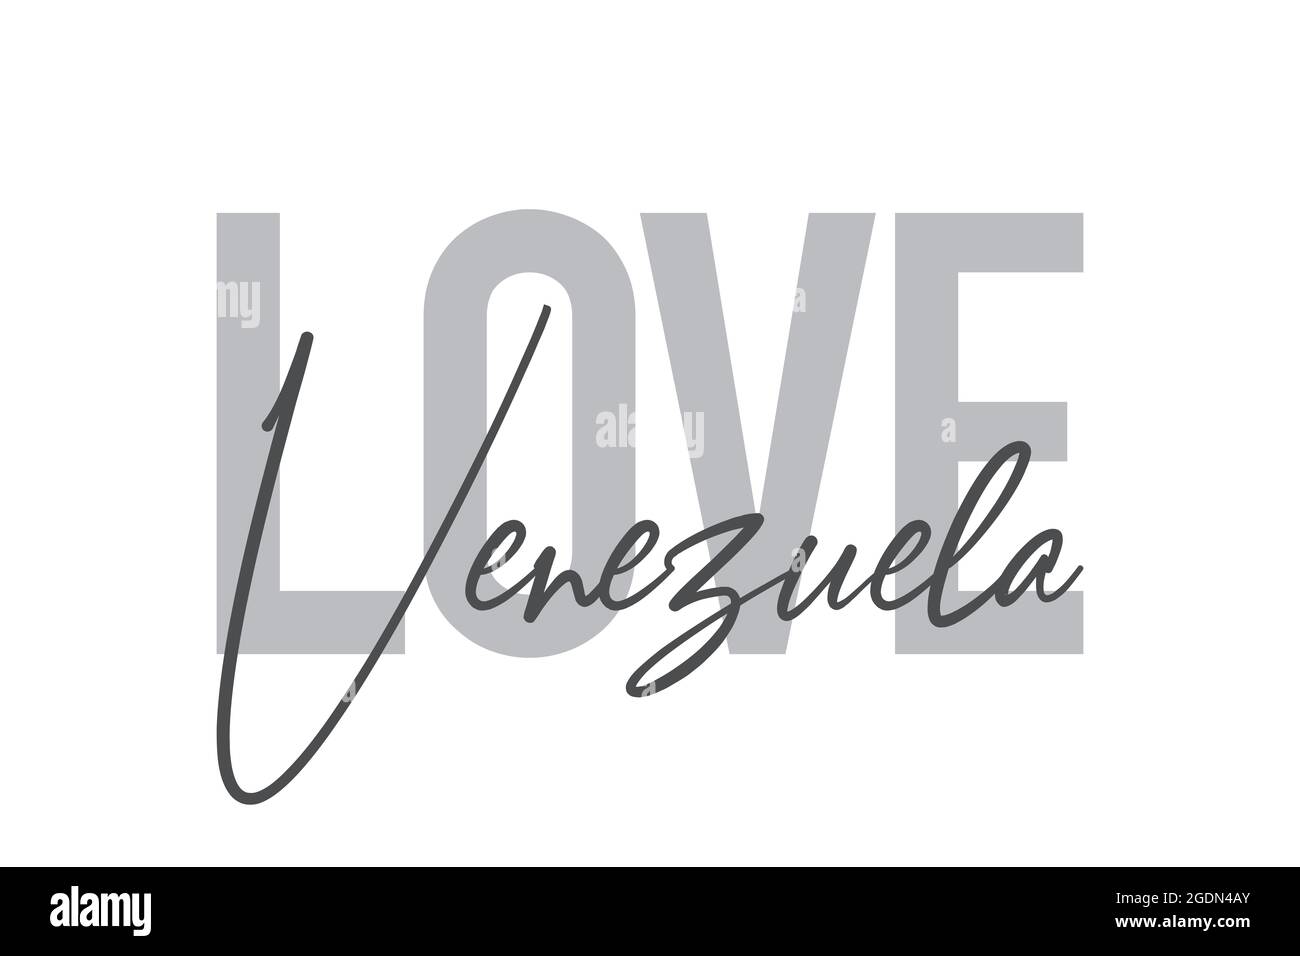 Modern, simple, minimal typographic design of a saying 'Love Venezuela' in tones of grey color. Cool, urban, trendy and playful graphic vector art wit Stock Photo